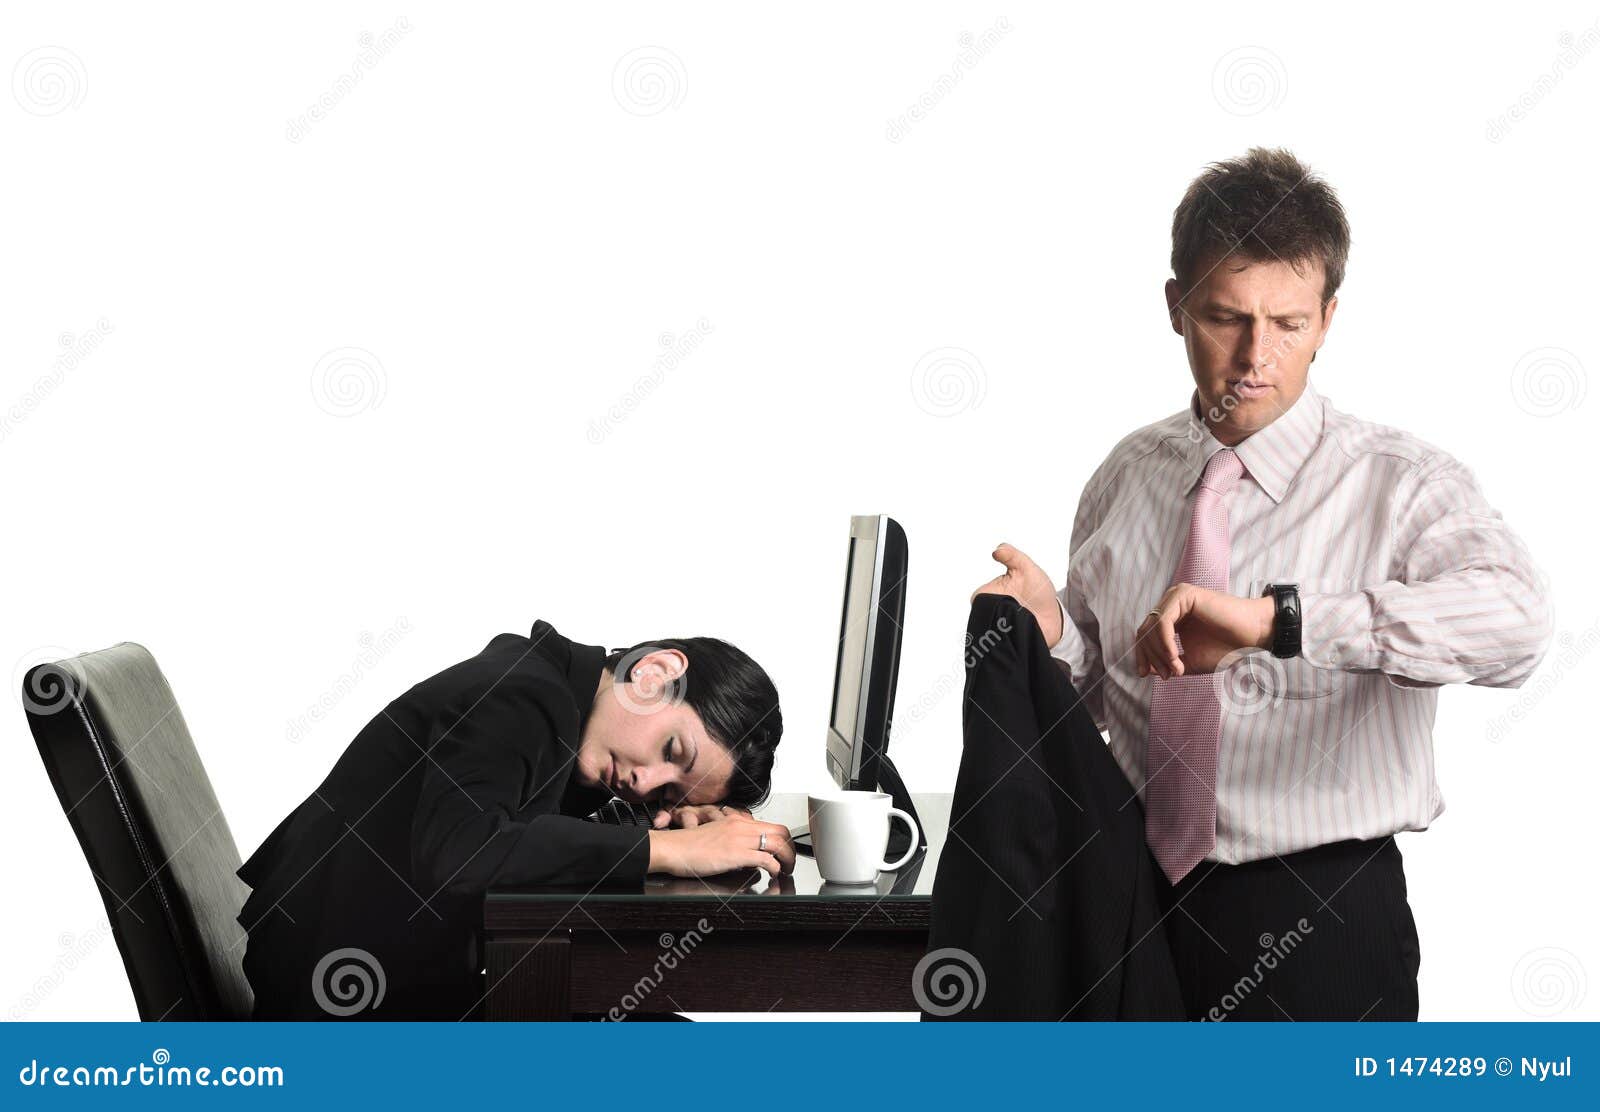 overtime workers in the office